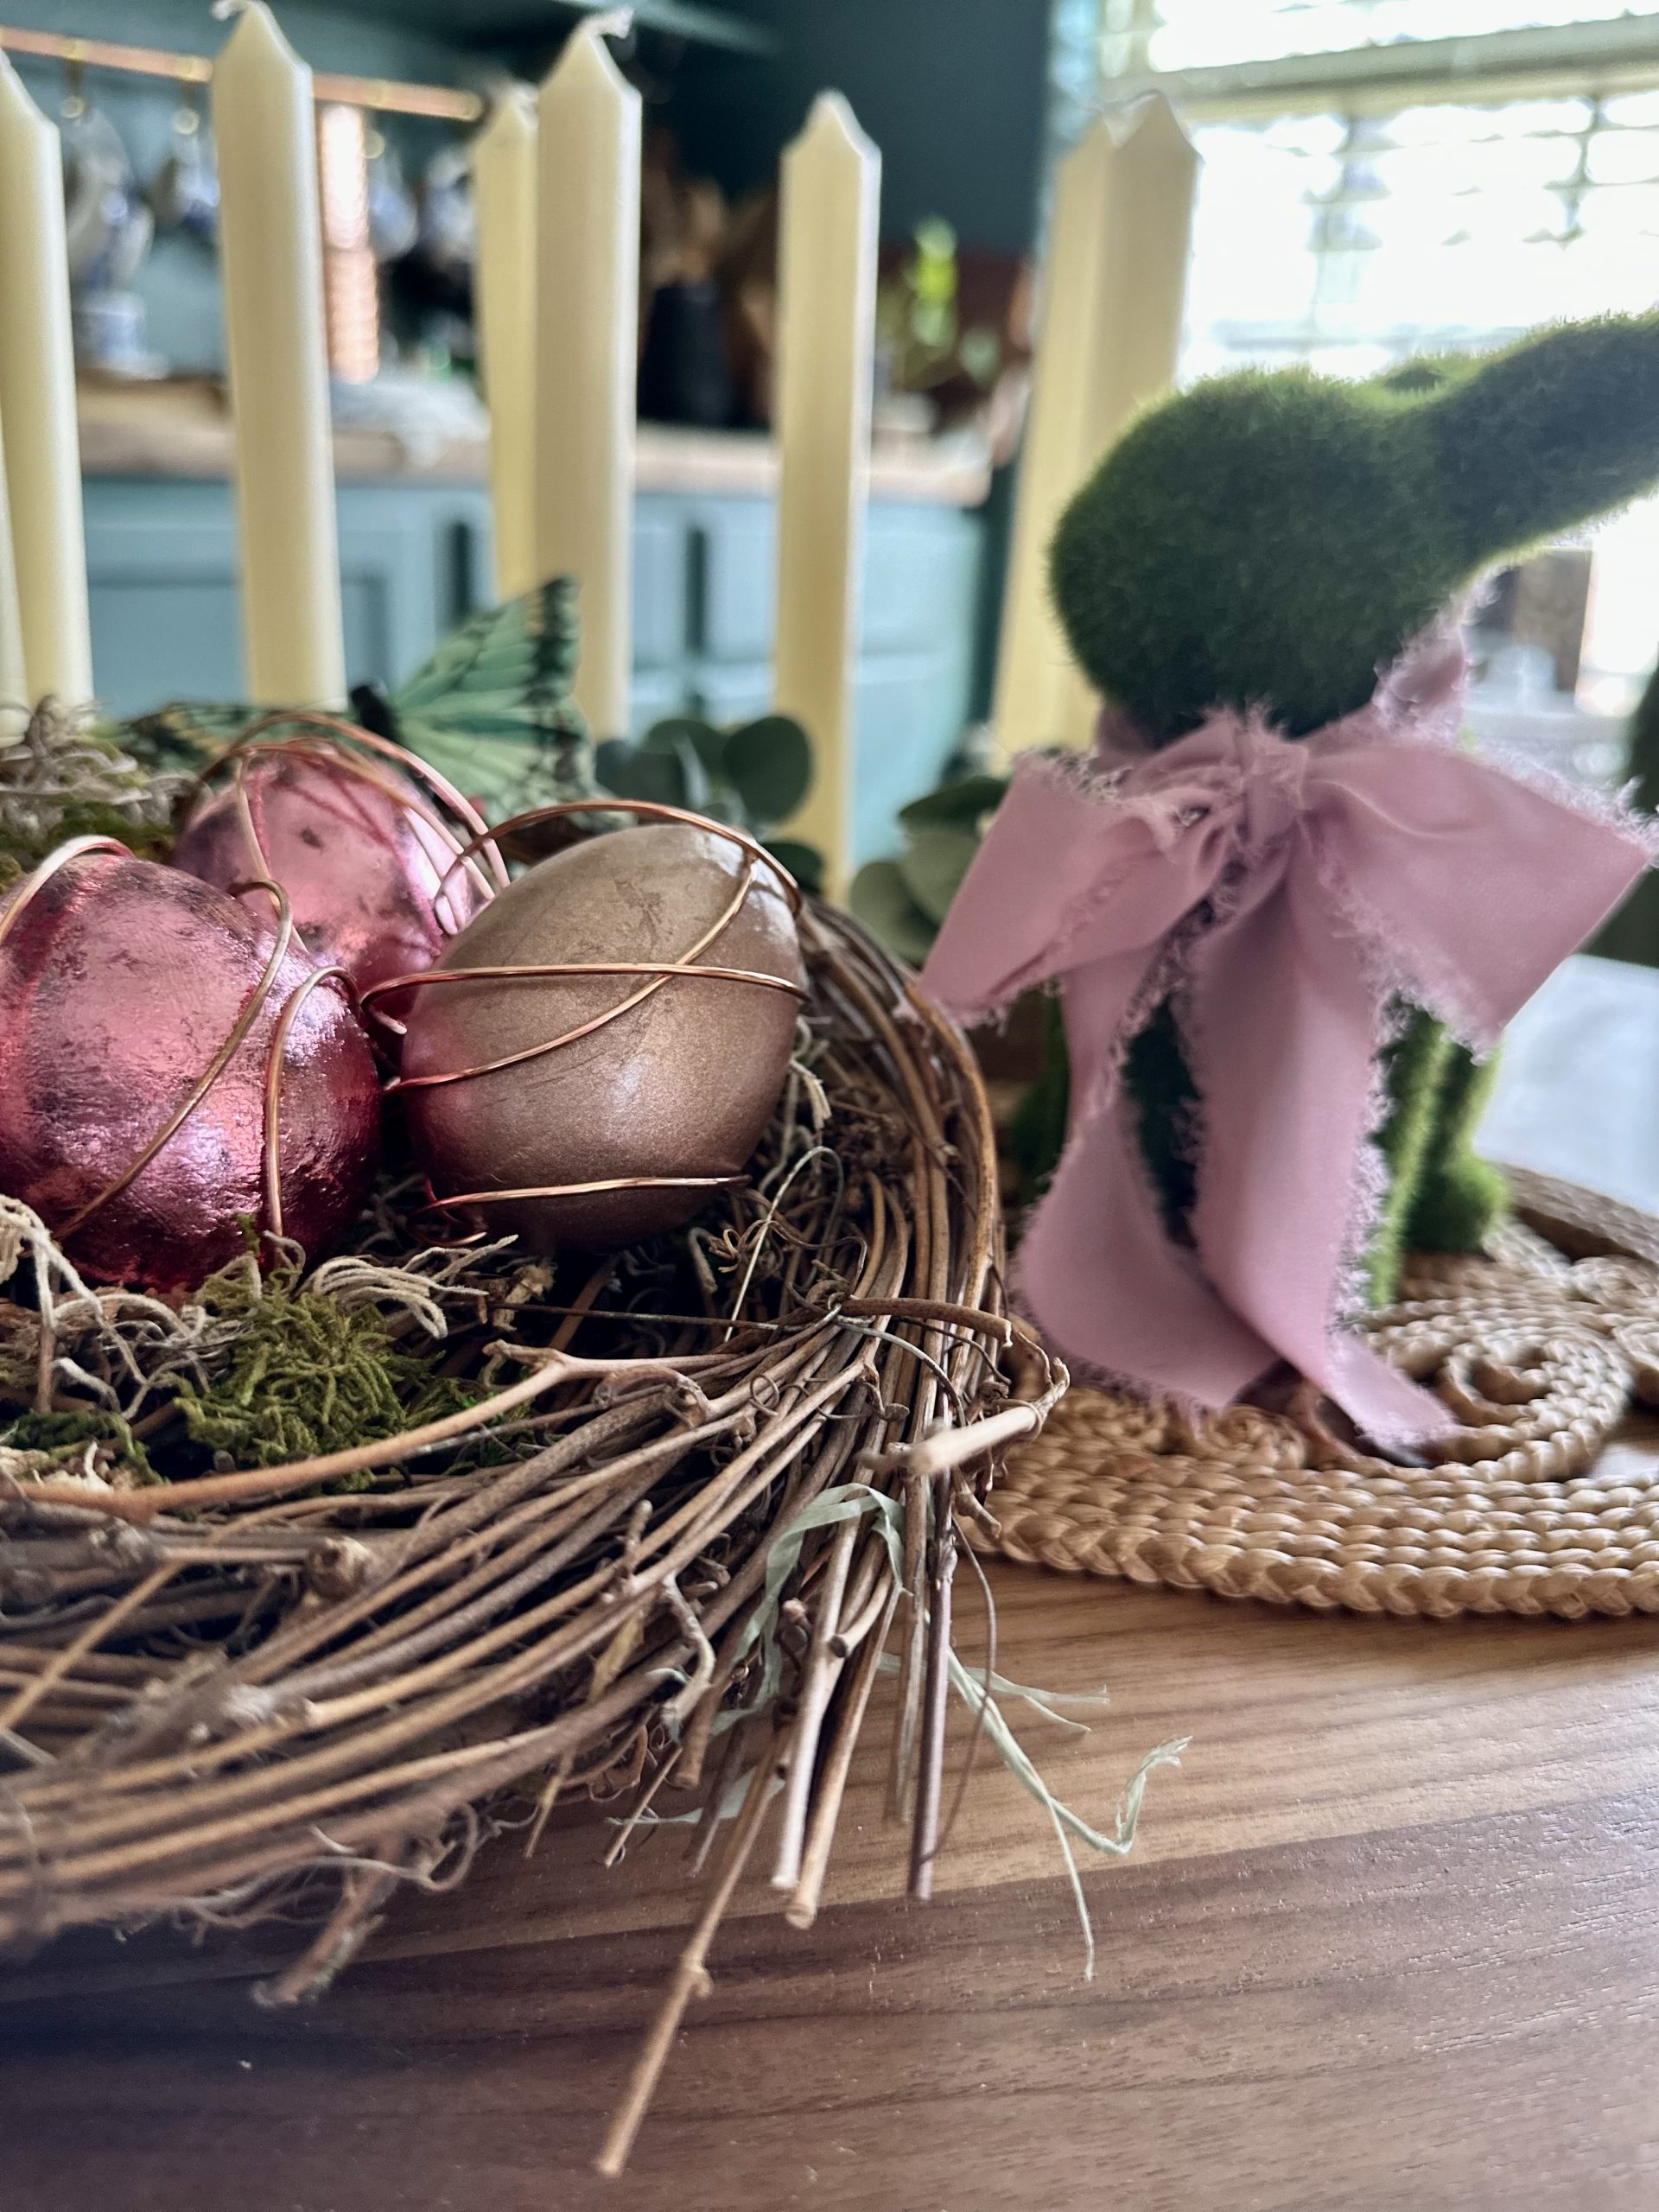 How To Make An Easter Egg Centerpiece